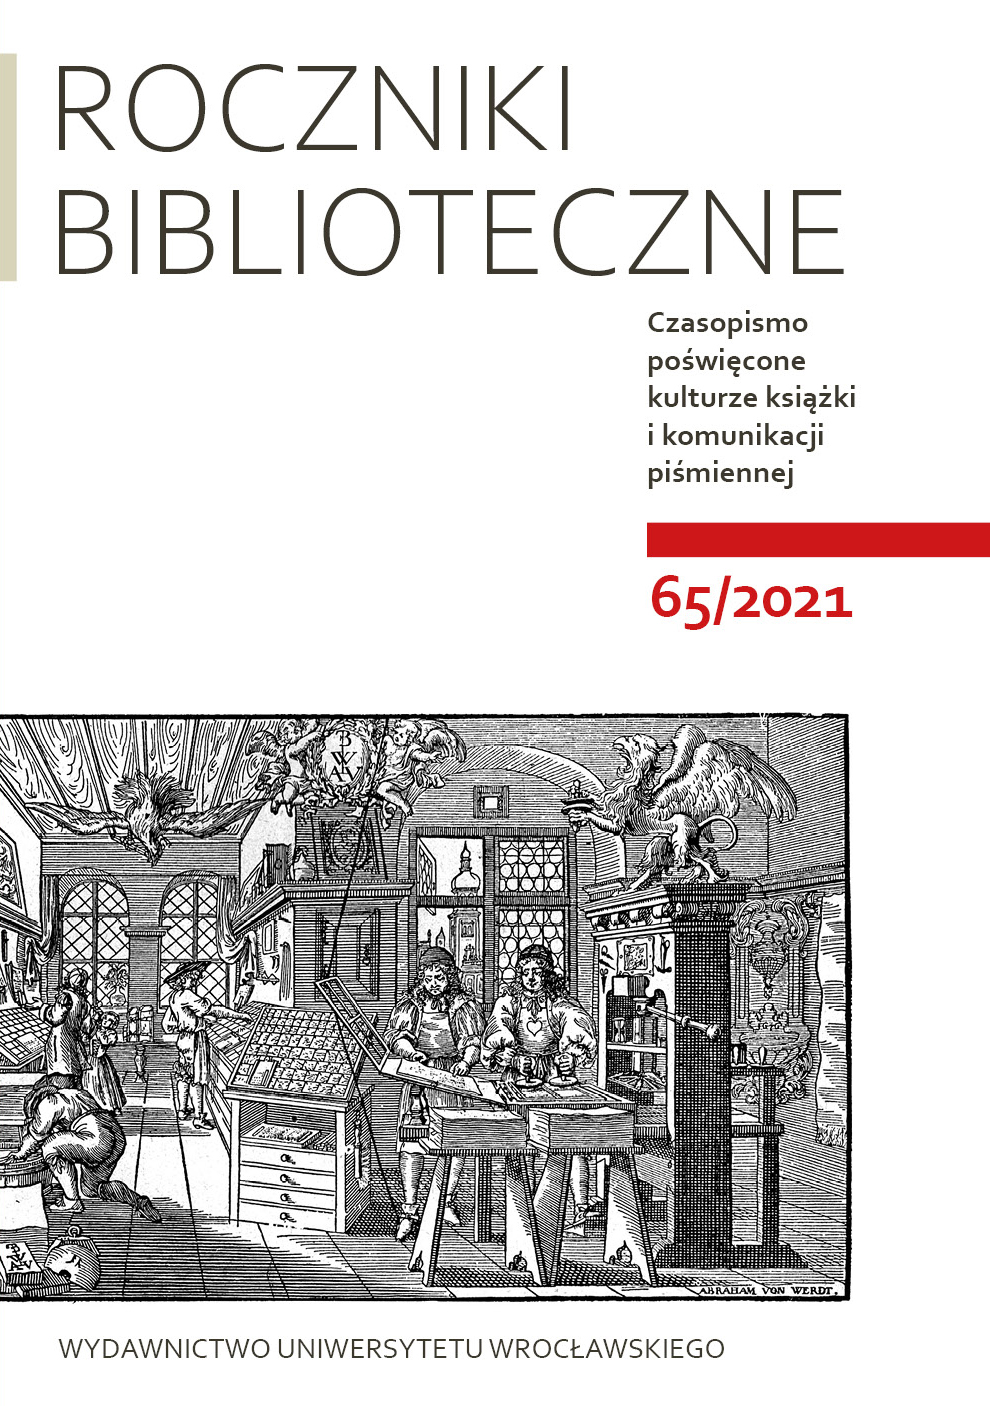 Michał Spandowski, “Catalogue of Incunabula in the National Library of Poland”, in collaboration with Sławomir Szyller, descriptions of bookbindings prepared by Maria Brynda, Warsaw: National Library of Poland, 2020, 2 vols., 695+382 pp. Cover Image